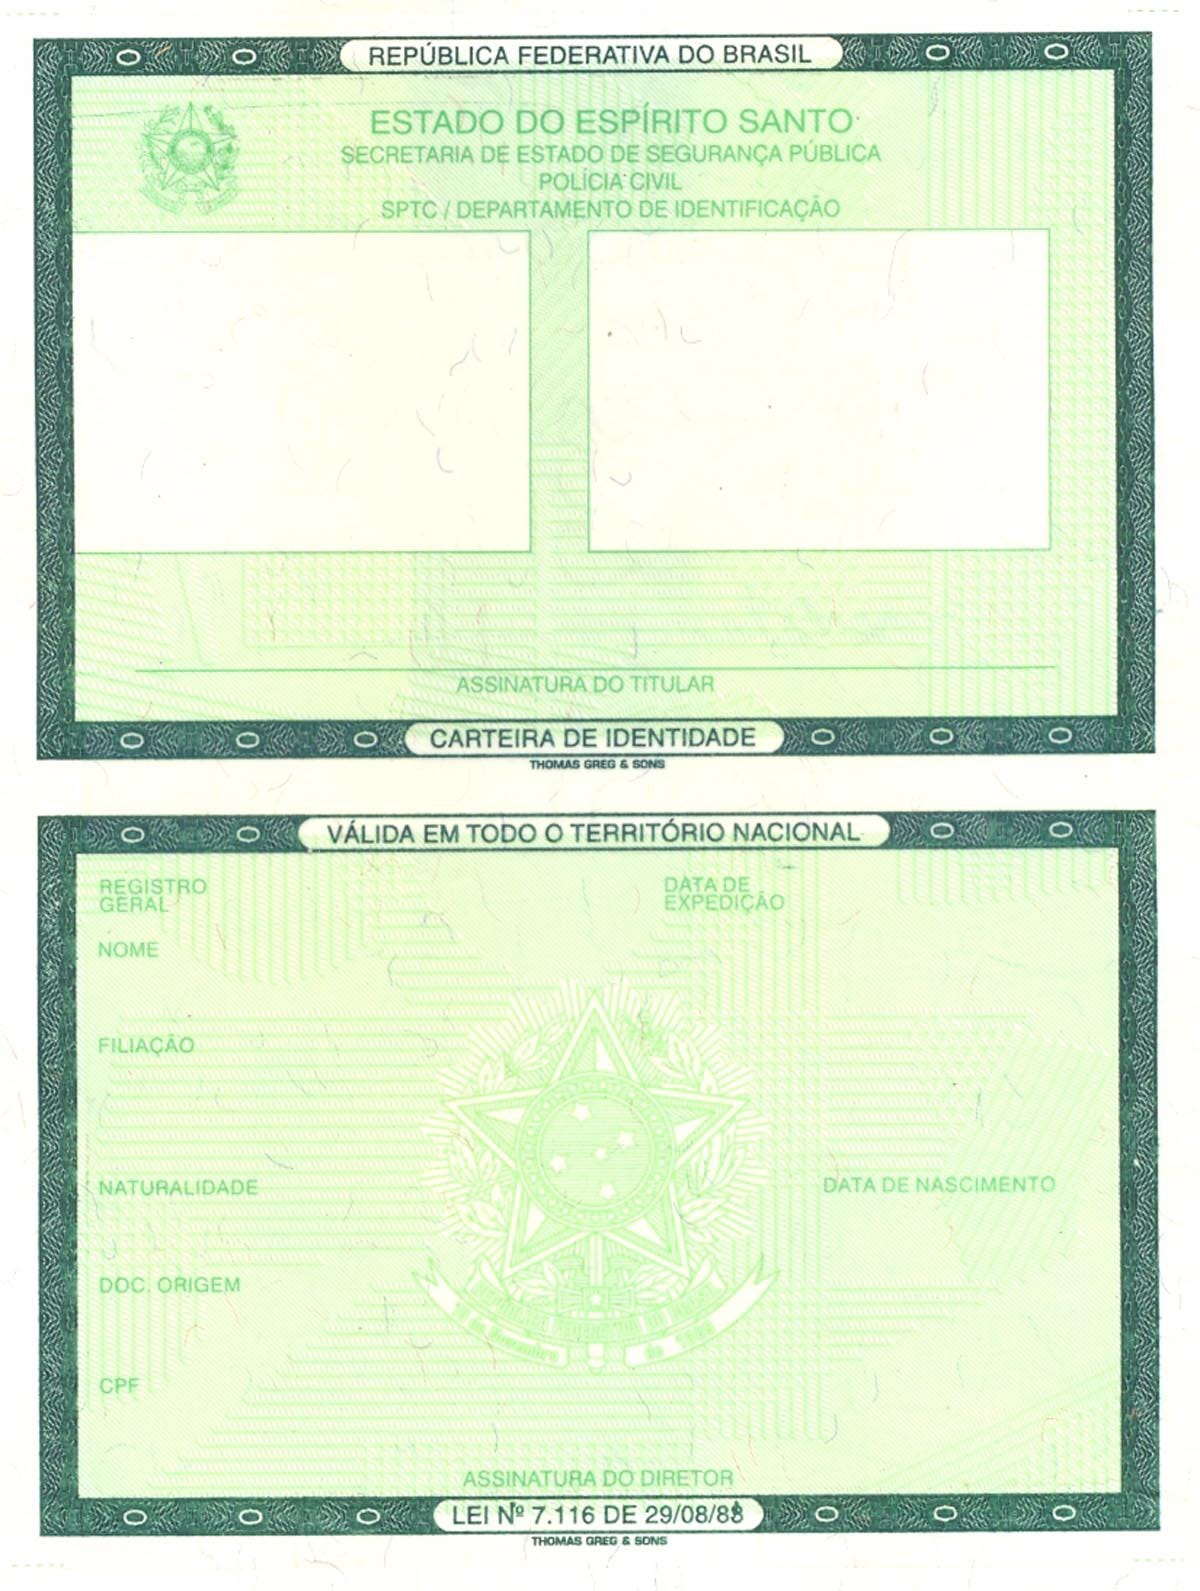 birth certificate national id document id number